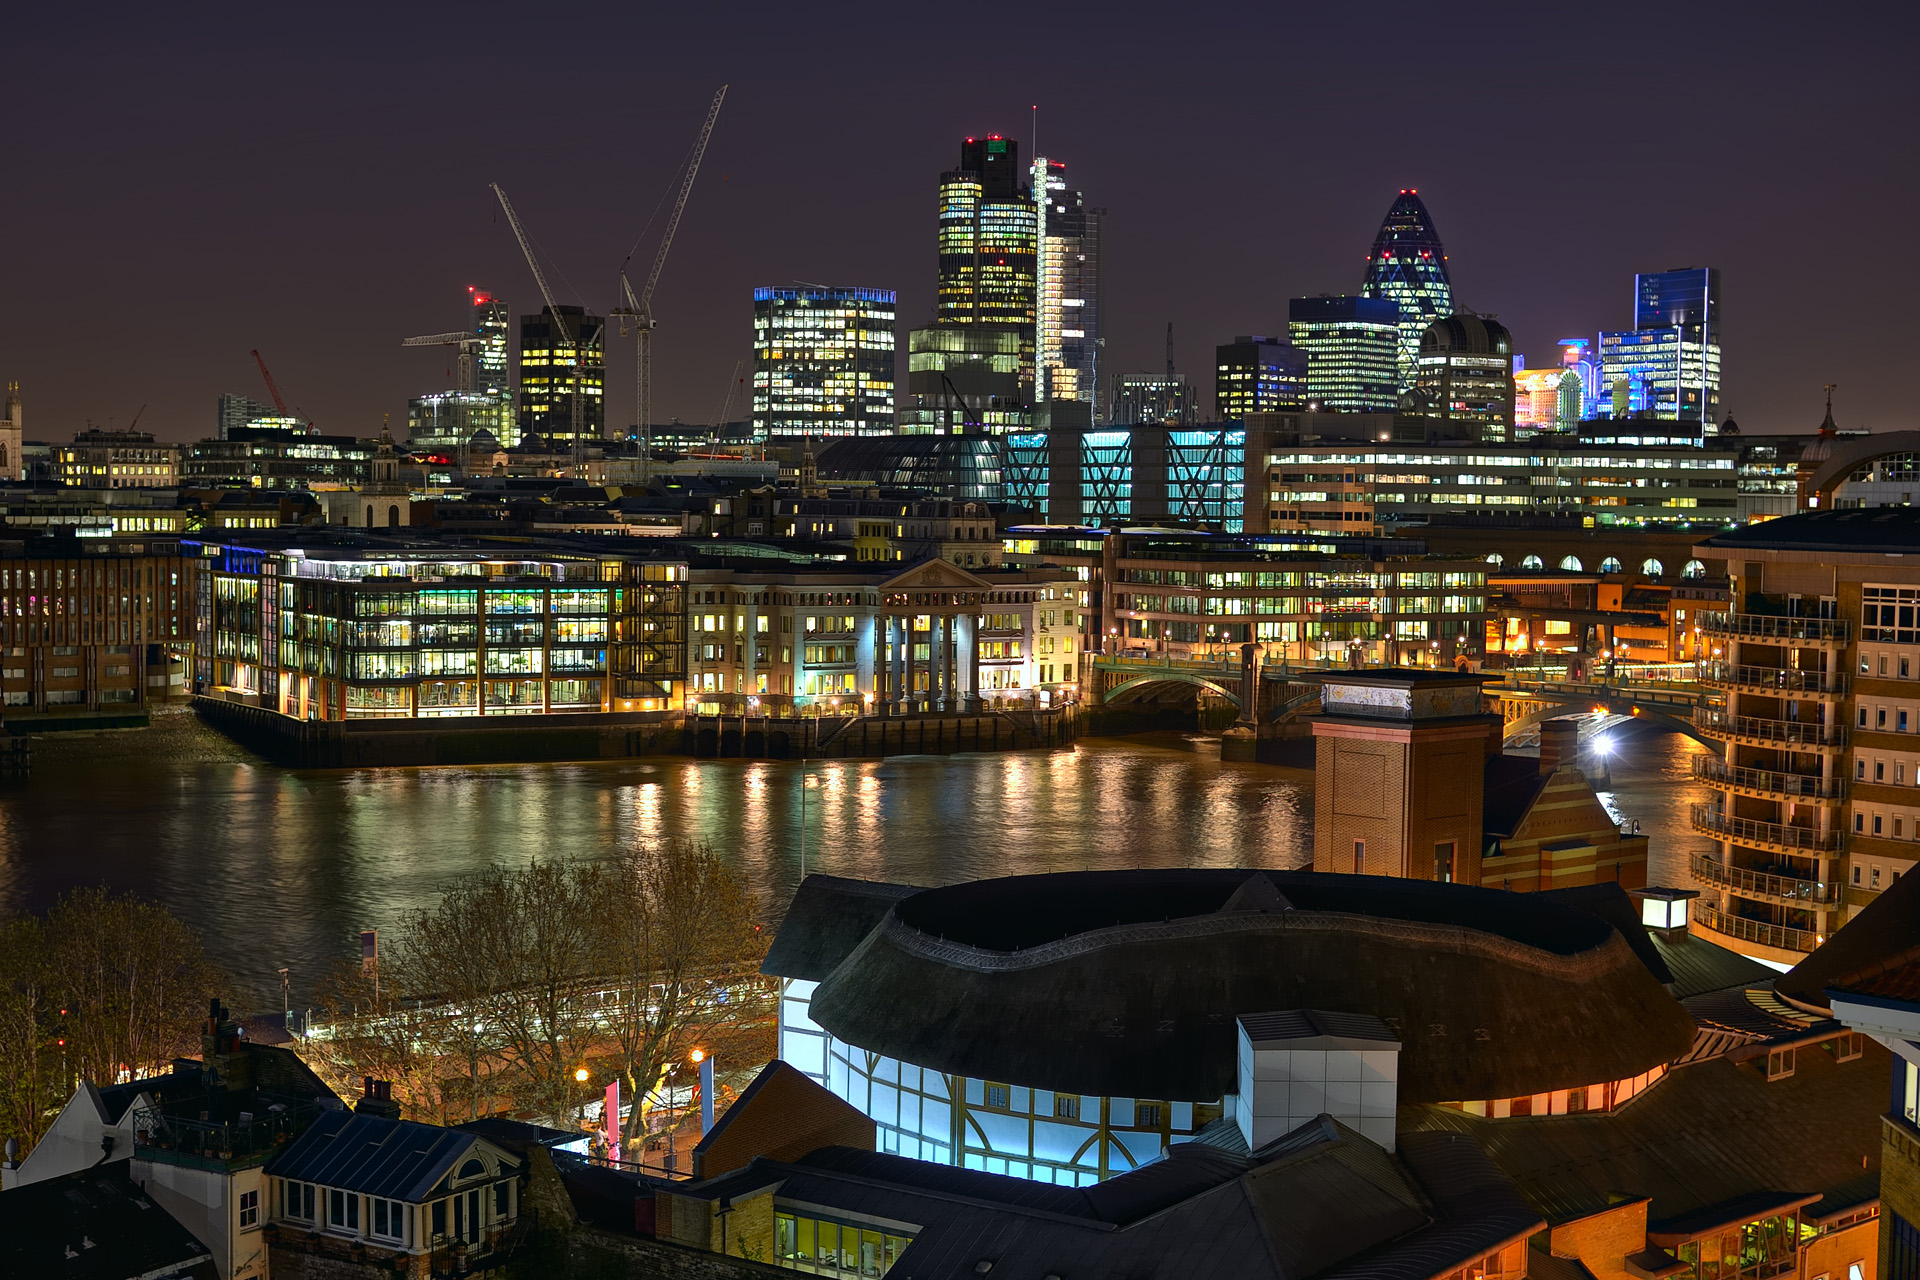 Looking over Shakespeare's Globe Theatre and the River Thames towards the City of London, England, UK, Europe, at night